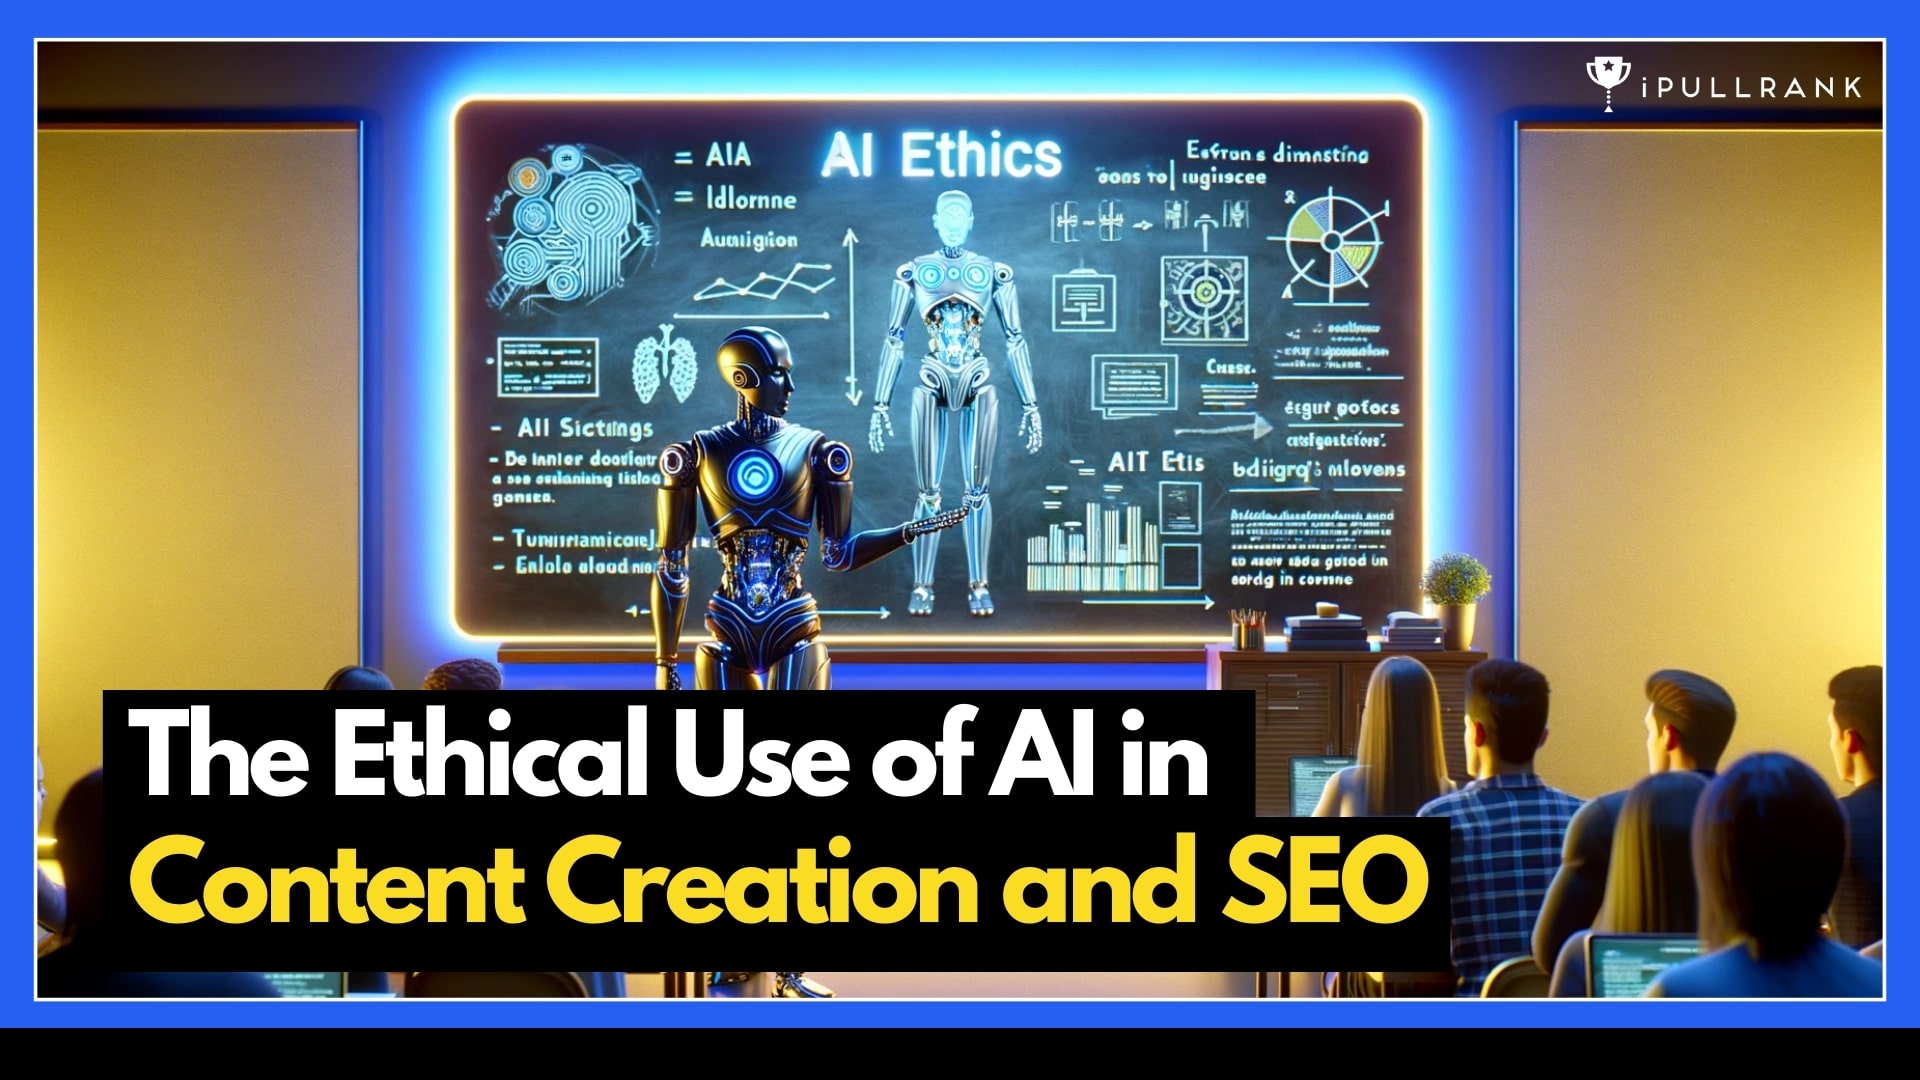 The Ethical Use of AI in Content Creation and SEO - Feature image